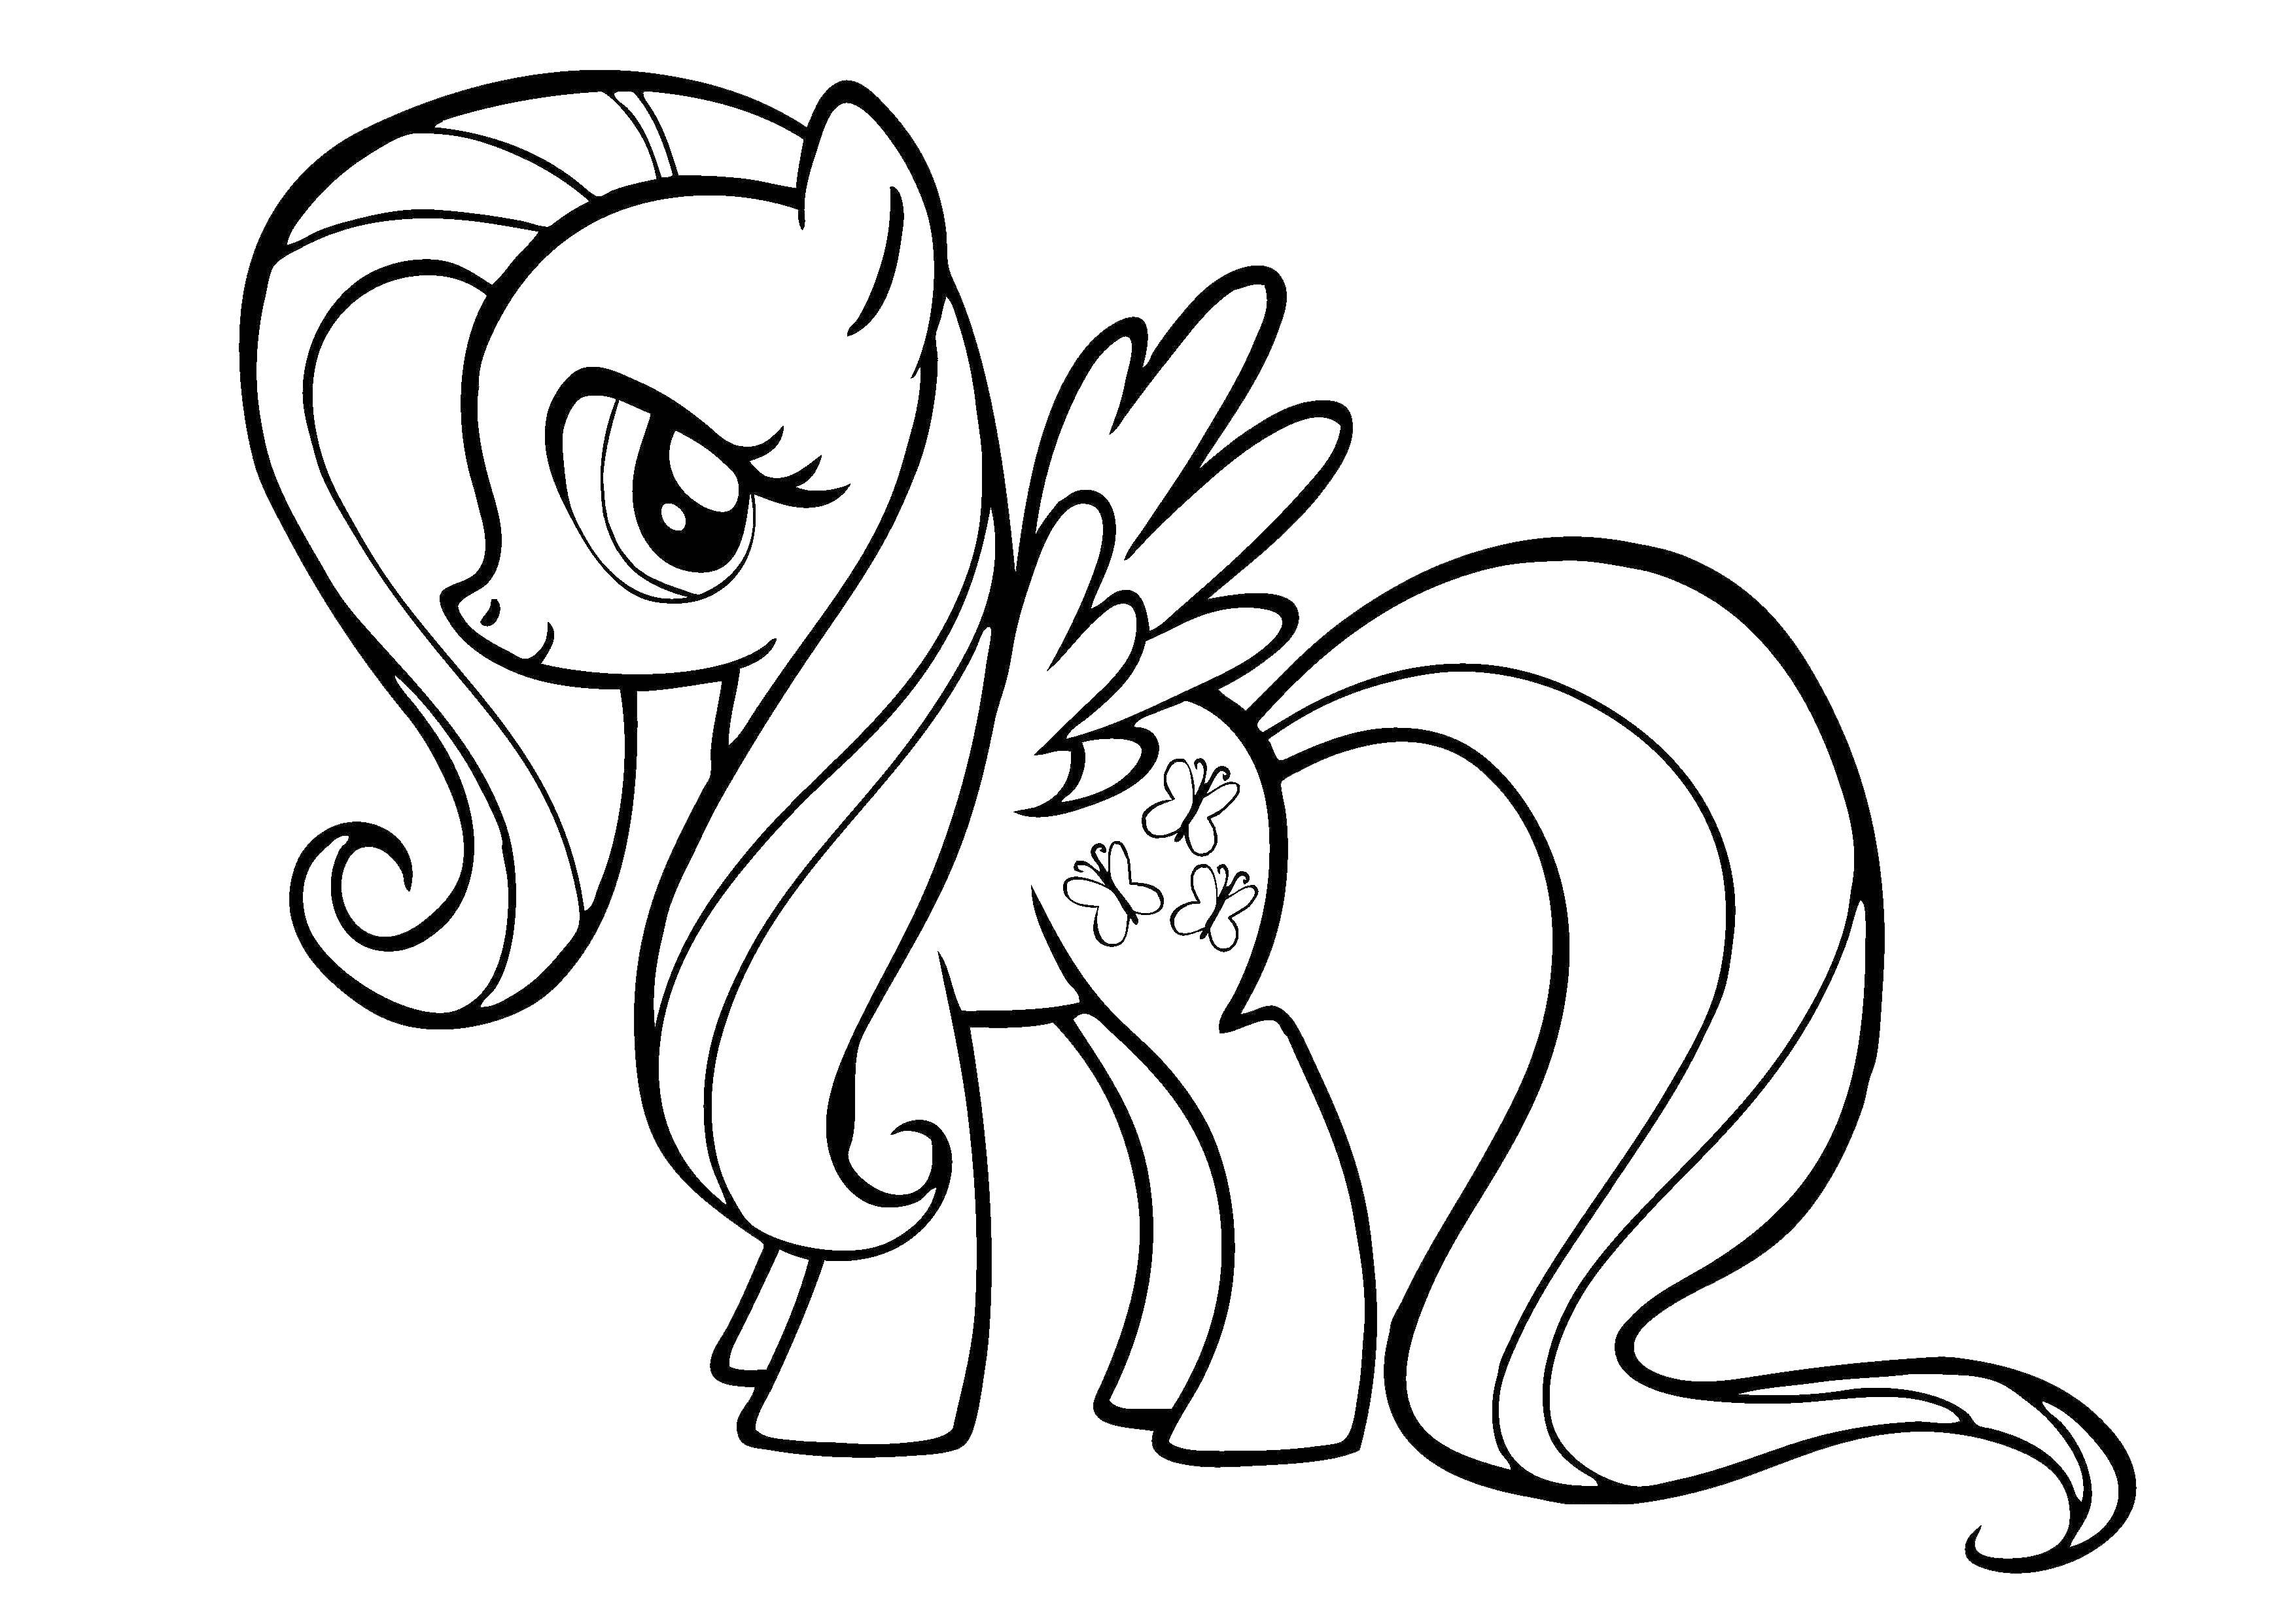 Coloring A pony with wings. Category Ponies. Tags:  pony tale, girls.